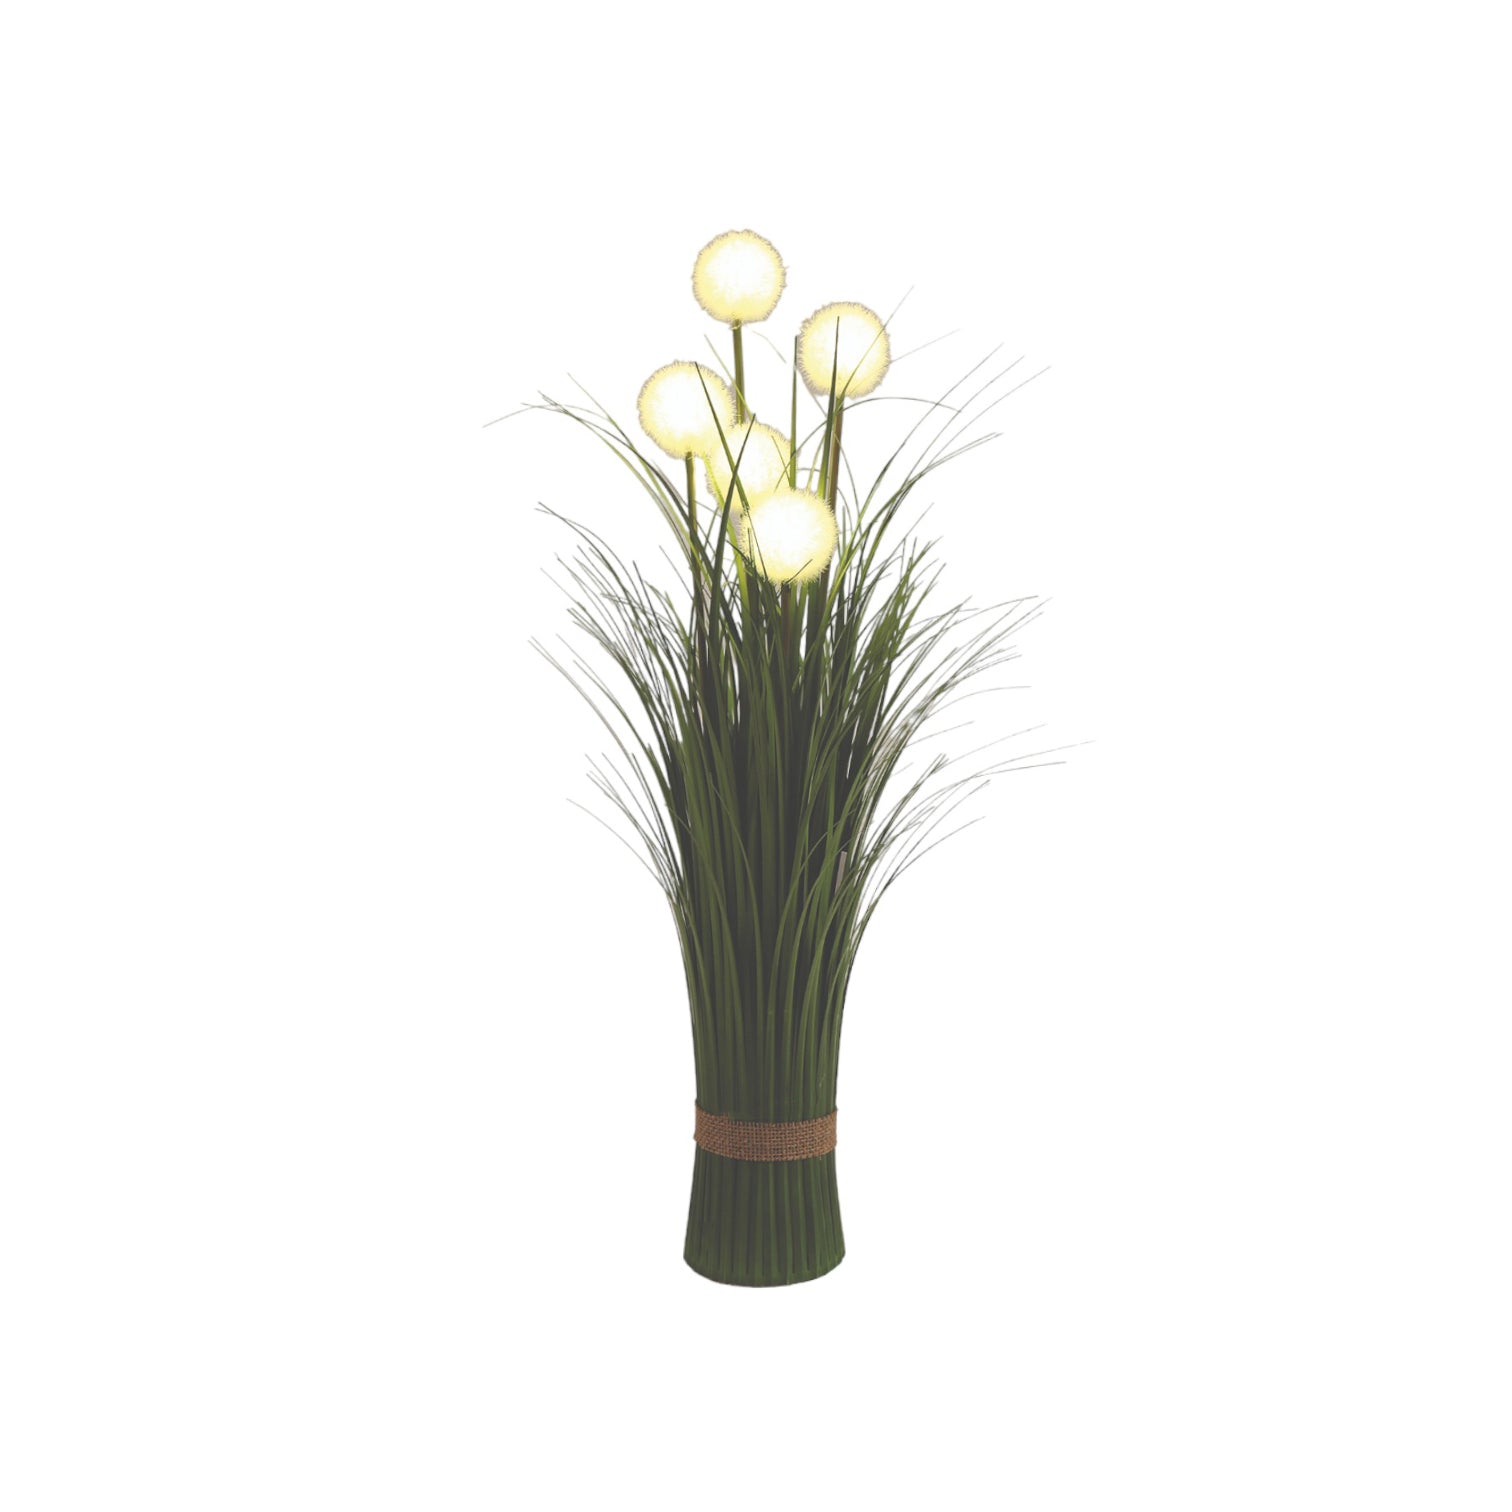 The Home Collection Light Up Floral Allium Grass 1 Shaws Department Stores